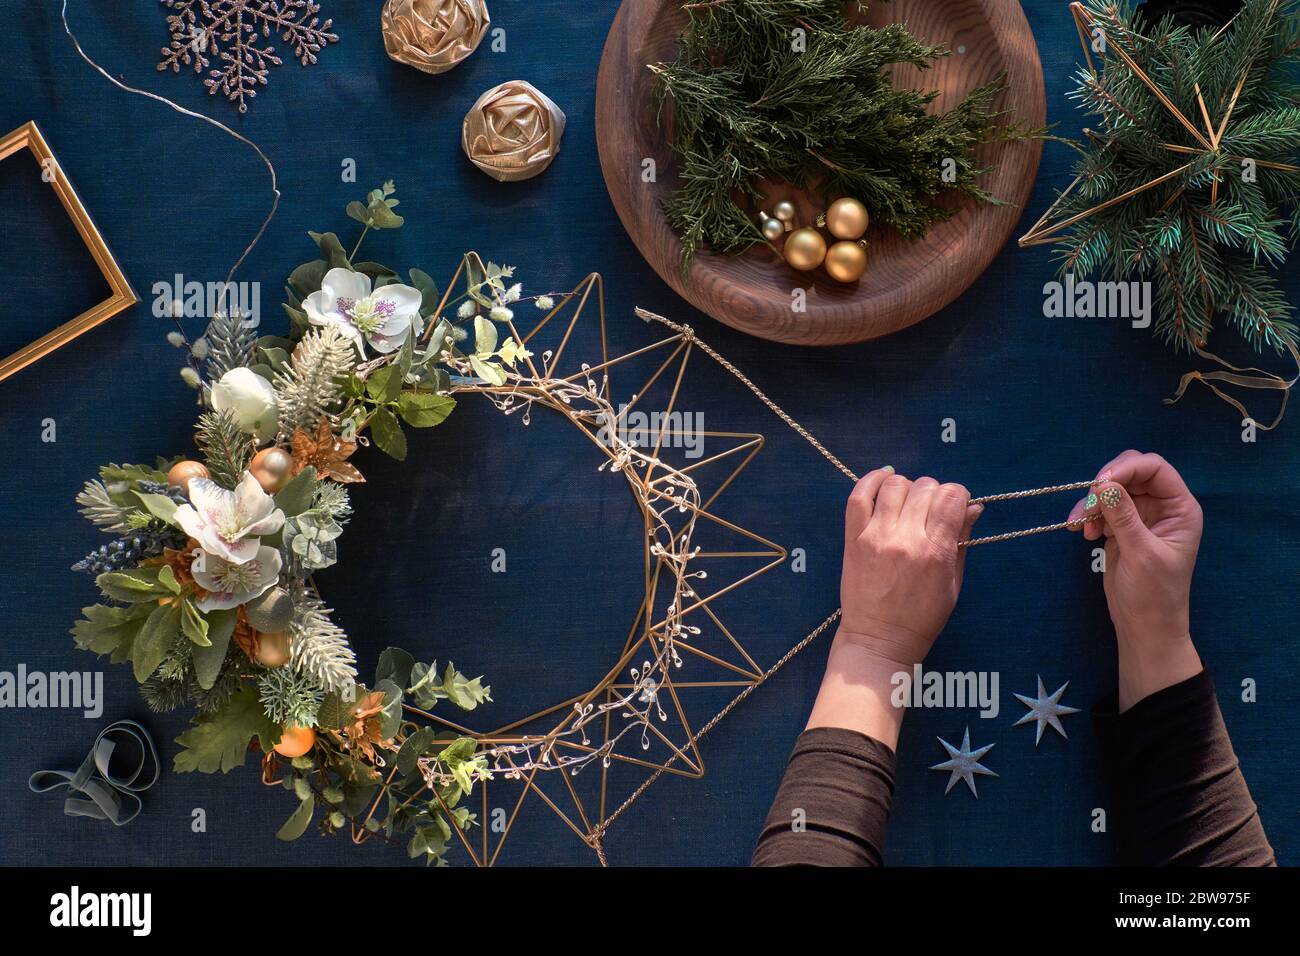 Making of decorative Christmas wreath on classic blue linen. Woman hands with handmade wreath. Xmas decorations, golden trinkets, decorative anemone f Stock Photo